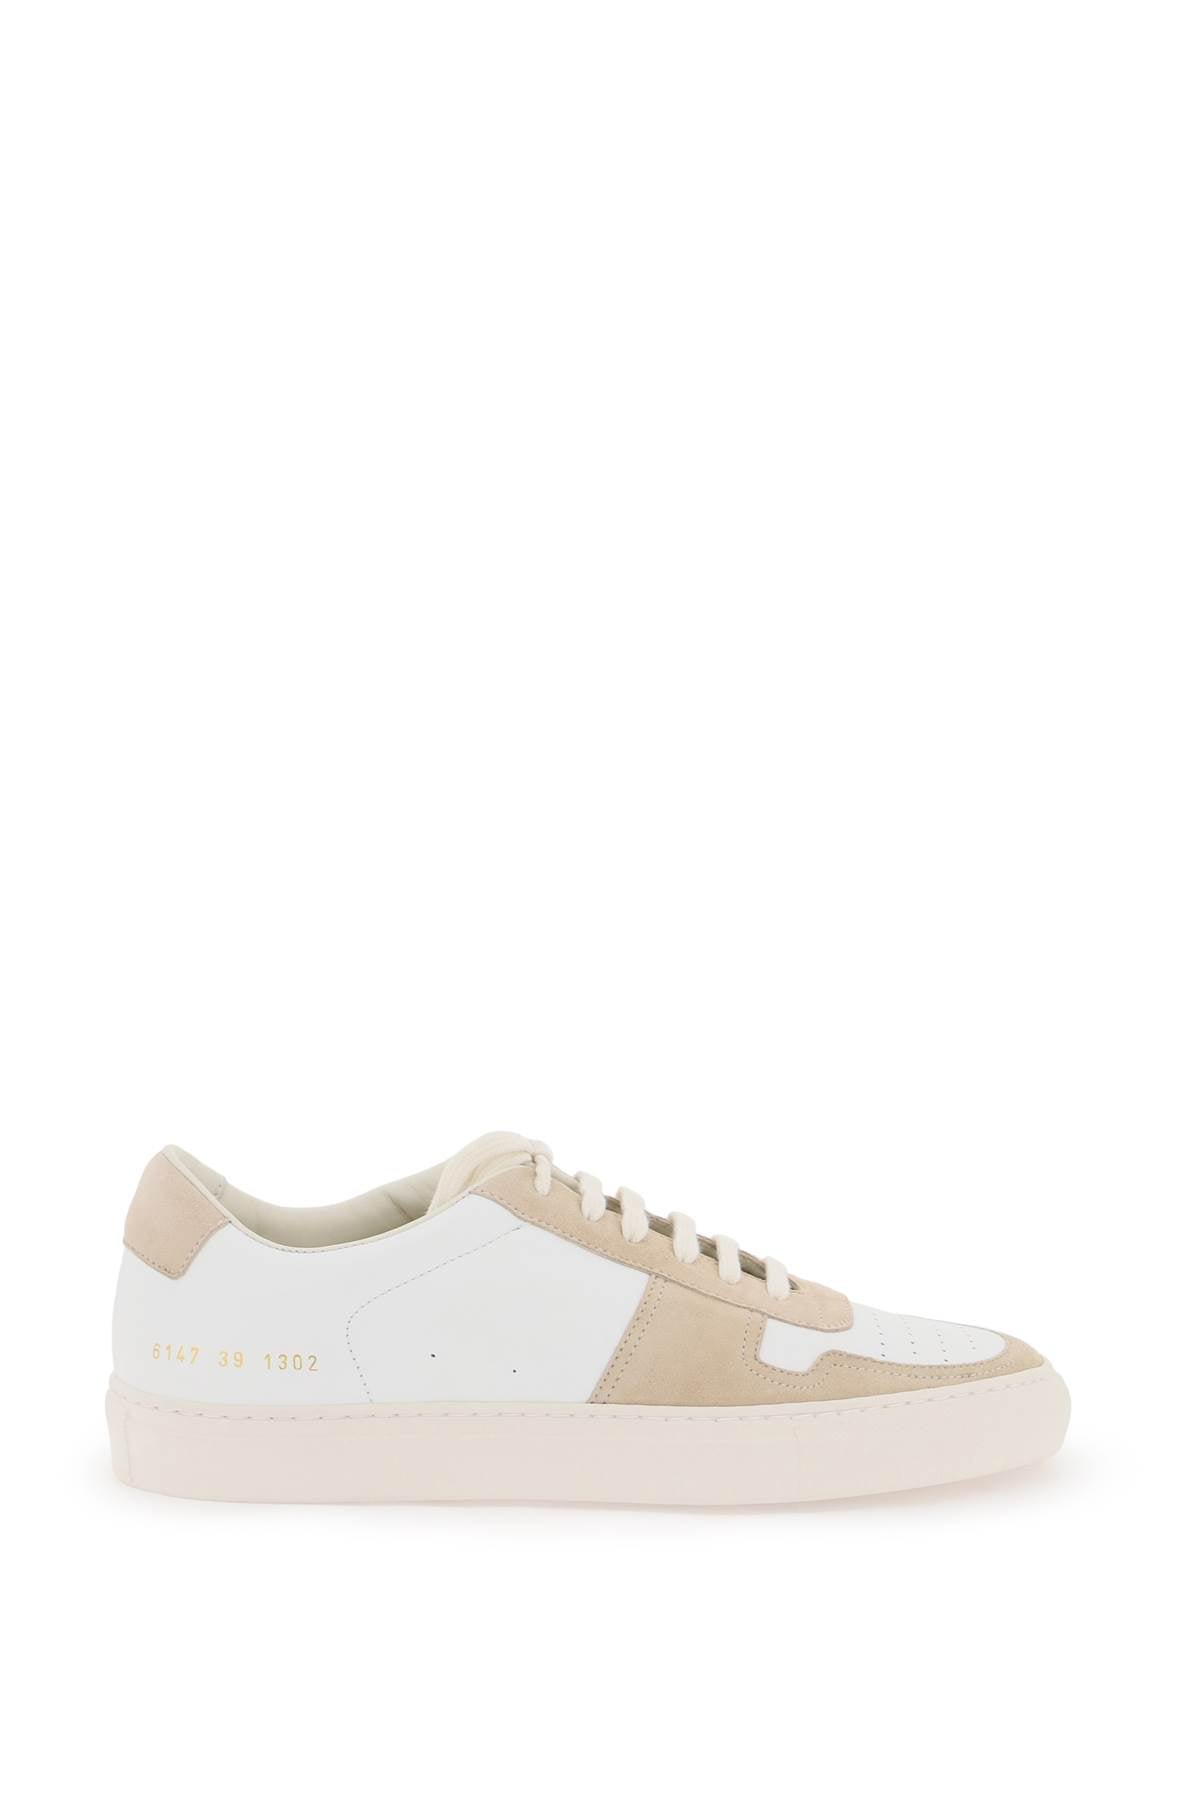 Common projects basketball sneaker-0